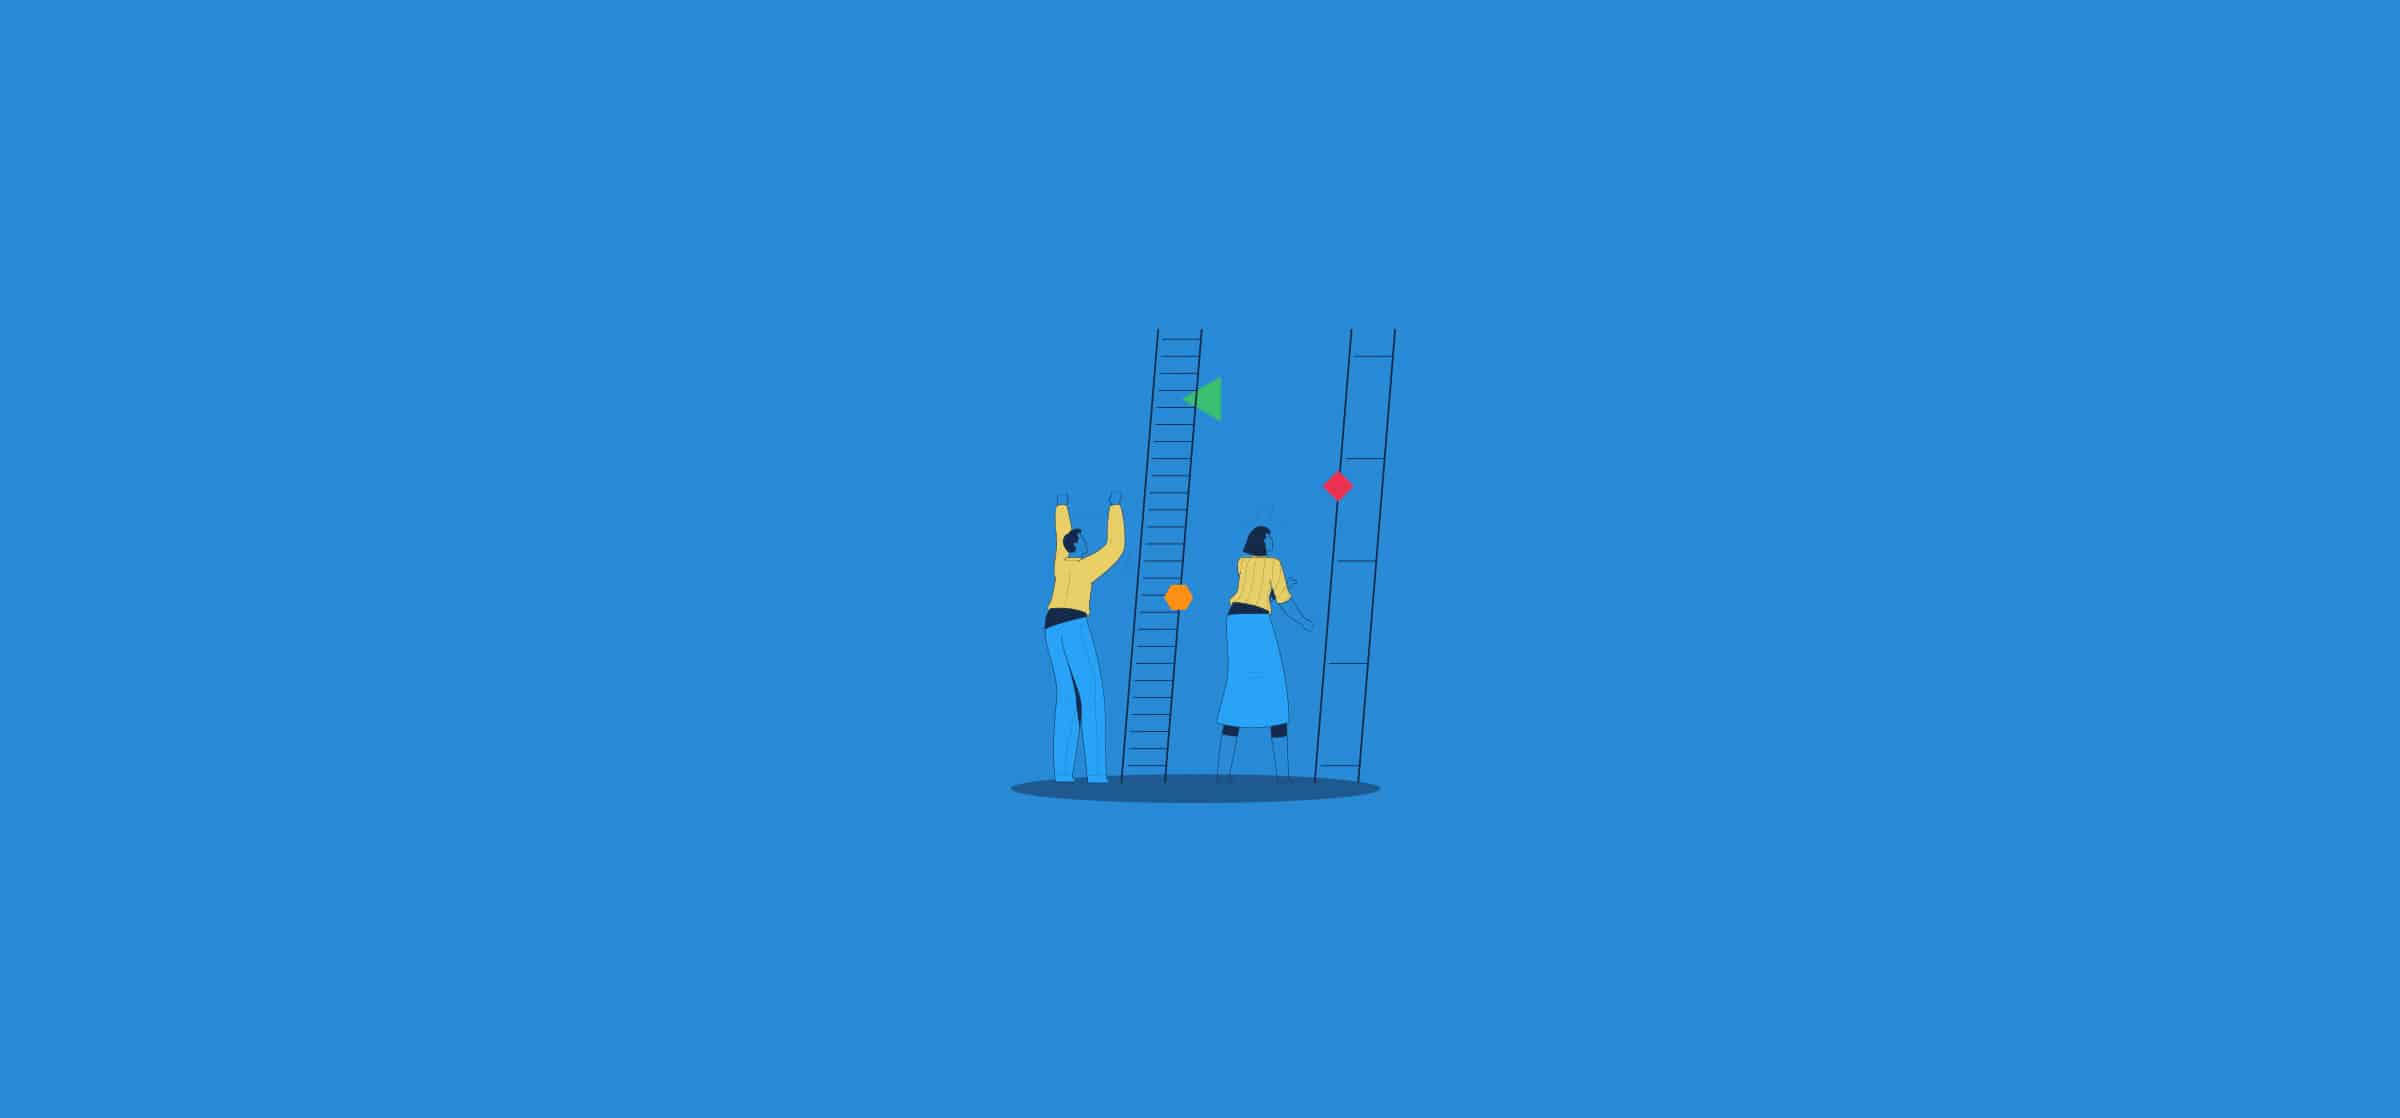 Two people standing at the bottom of two ladders, one with more rungs than the other, representing performance management.